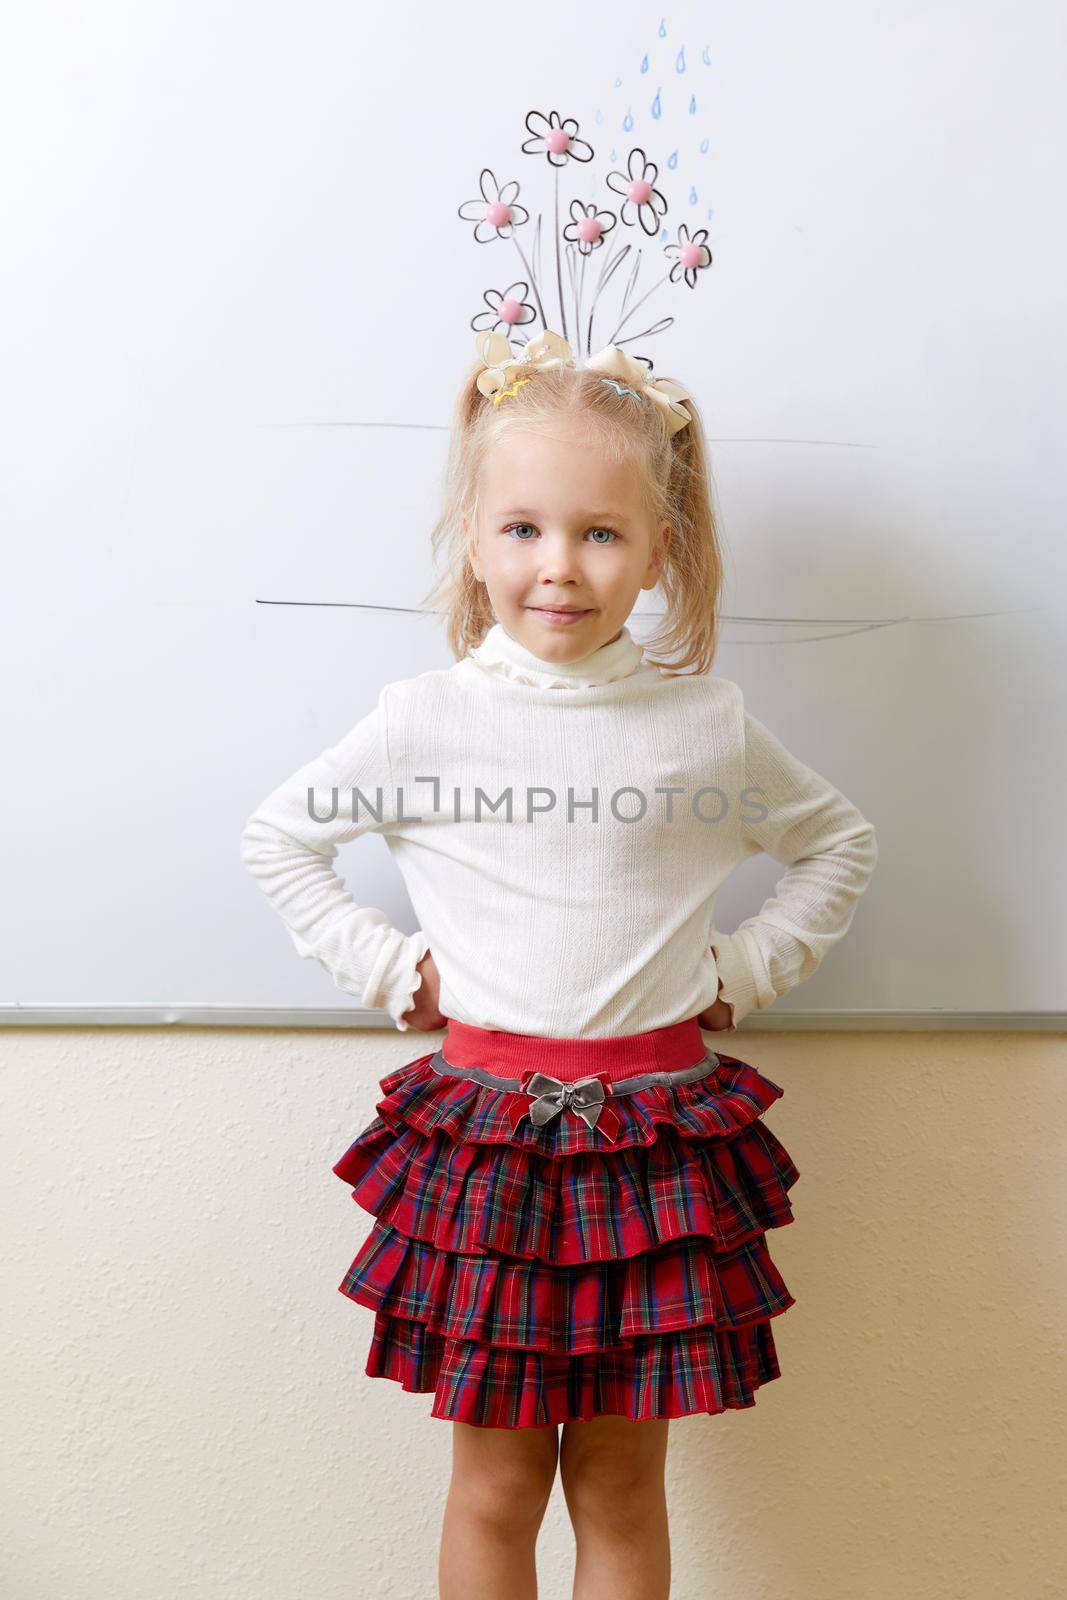 Little girl standing near white board in a class with flowers drawing on board